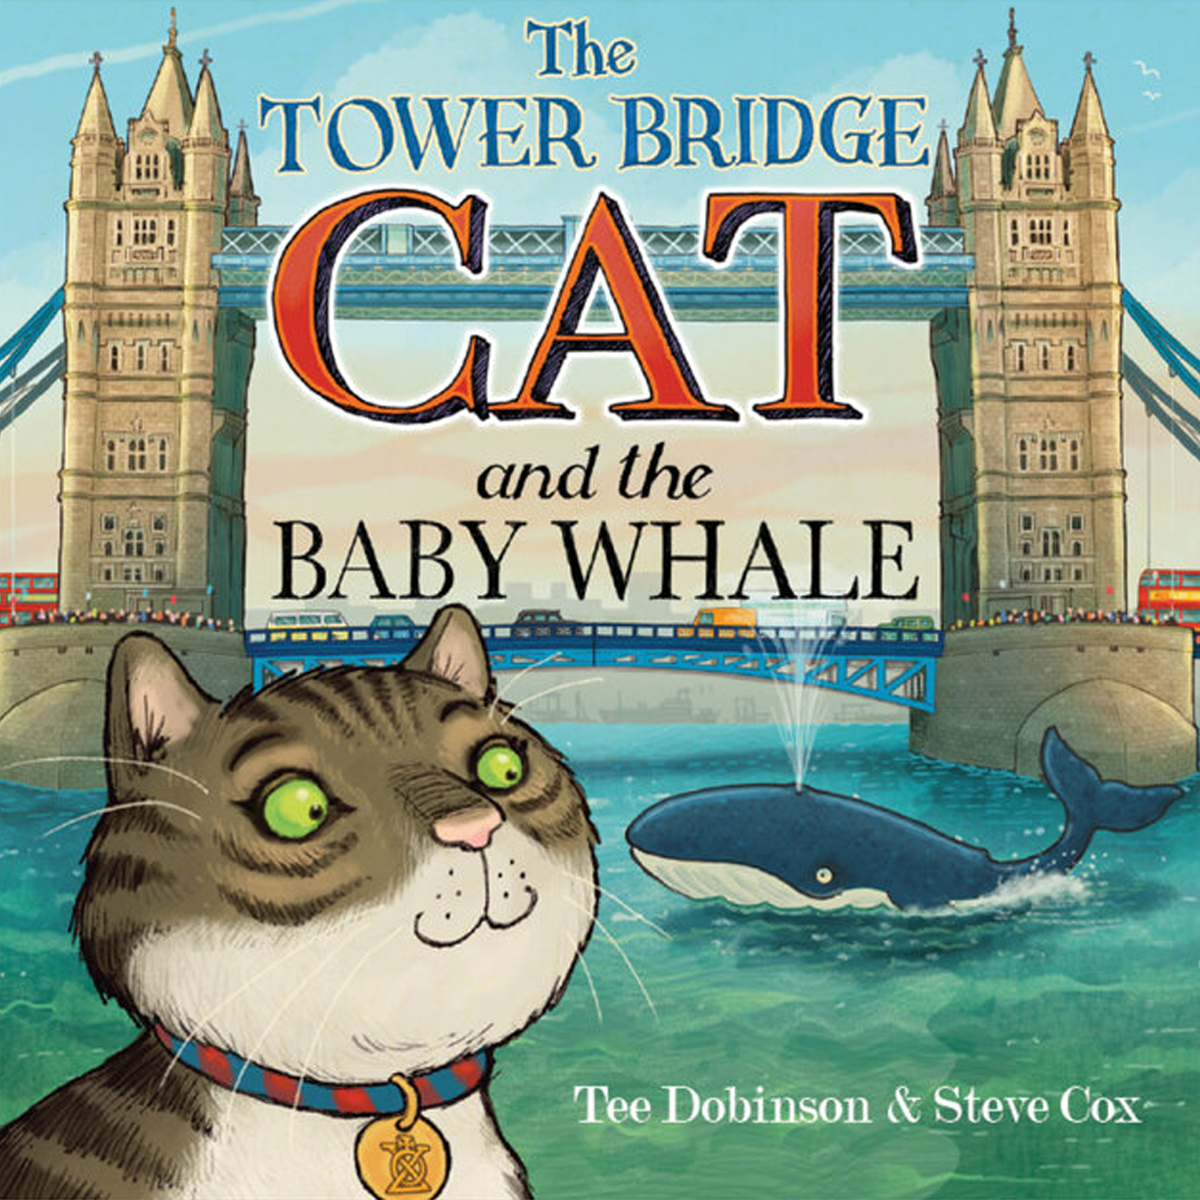 Tower Bridge Cat and The Baby Whale Book cover